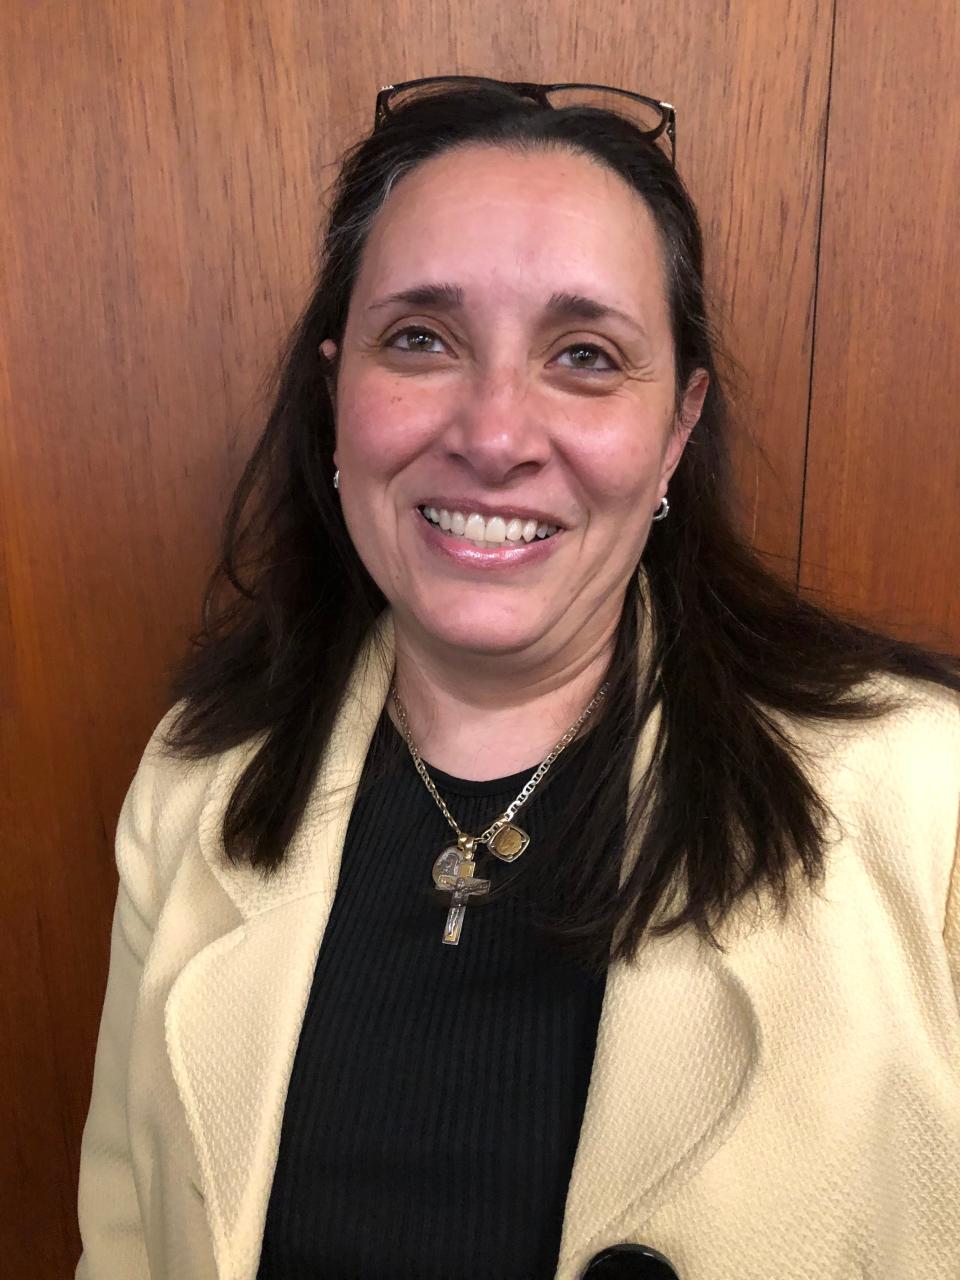 Dr. Sylvana Atallah of Granger has proposed that she could acquire the county home Portage Manor in South Bend, renovate it and run it, keeping its current residents.